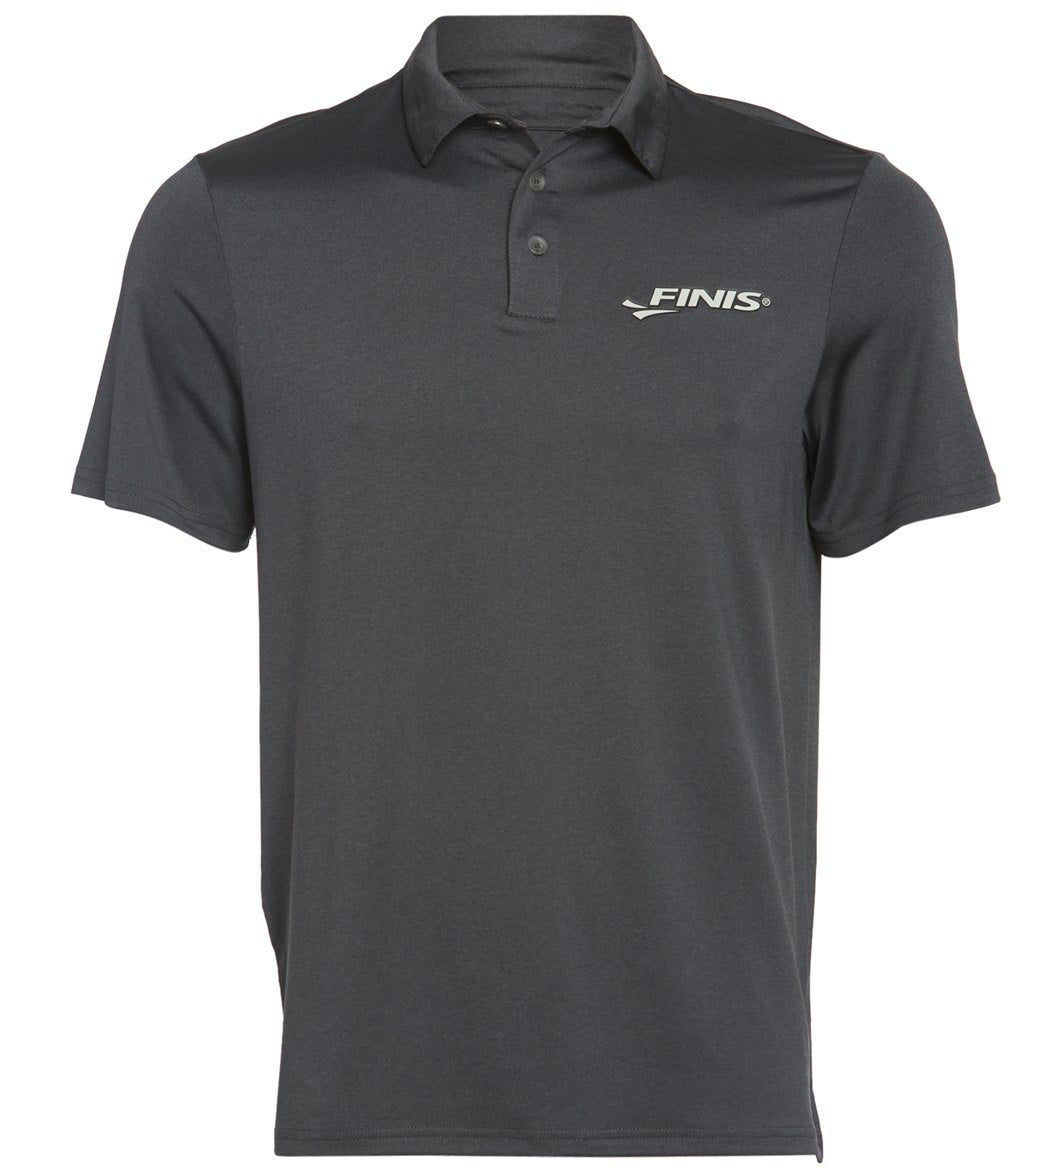 Finis Coaches Polo Shirt - Charcoal Large Size Large - Swimoutlet.com